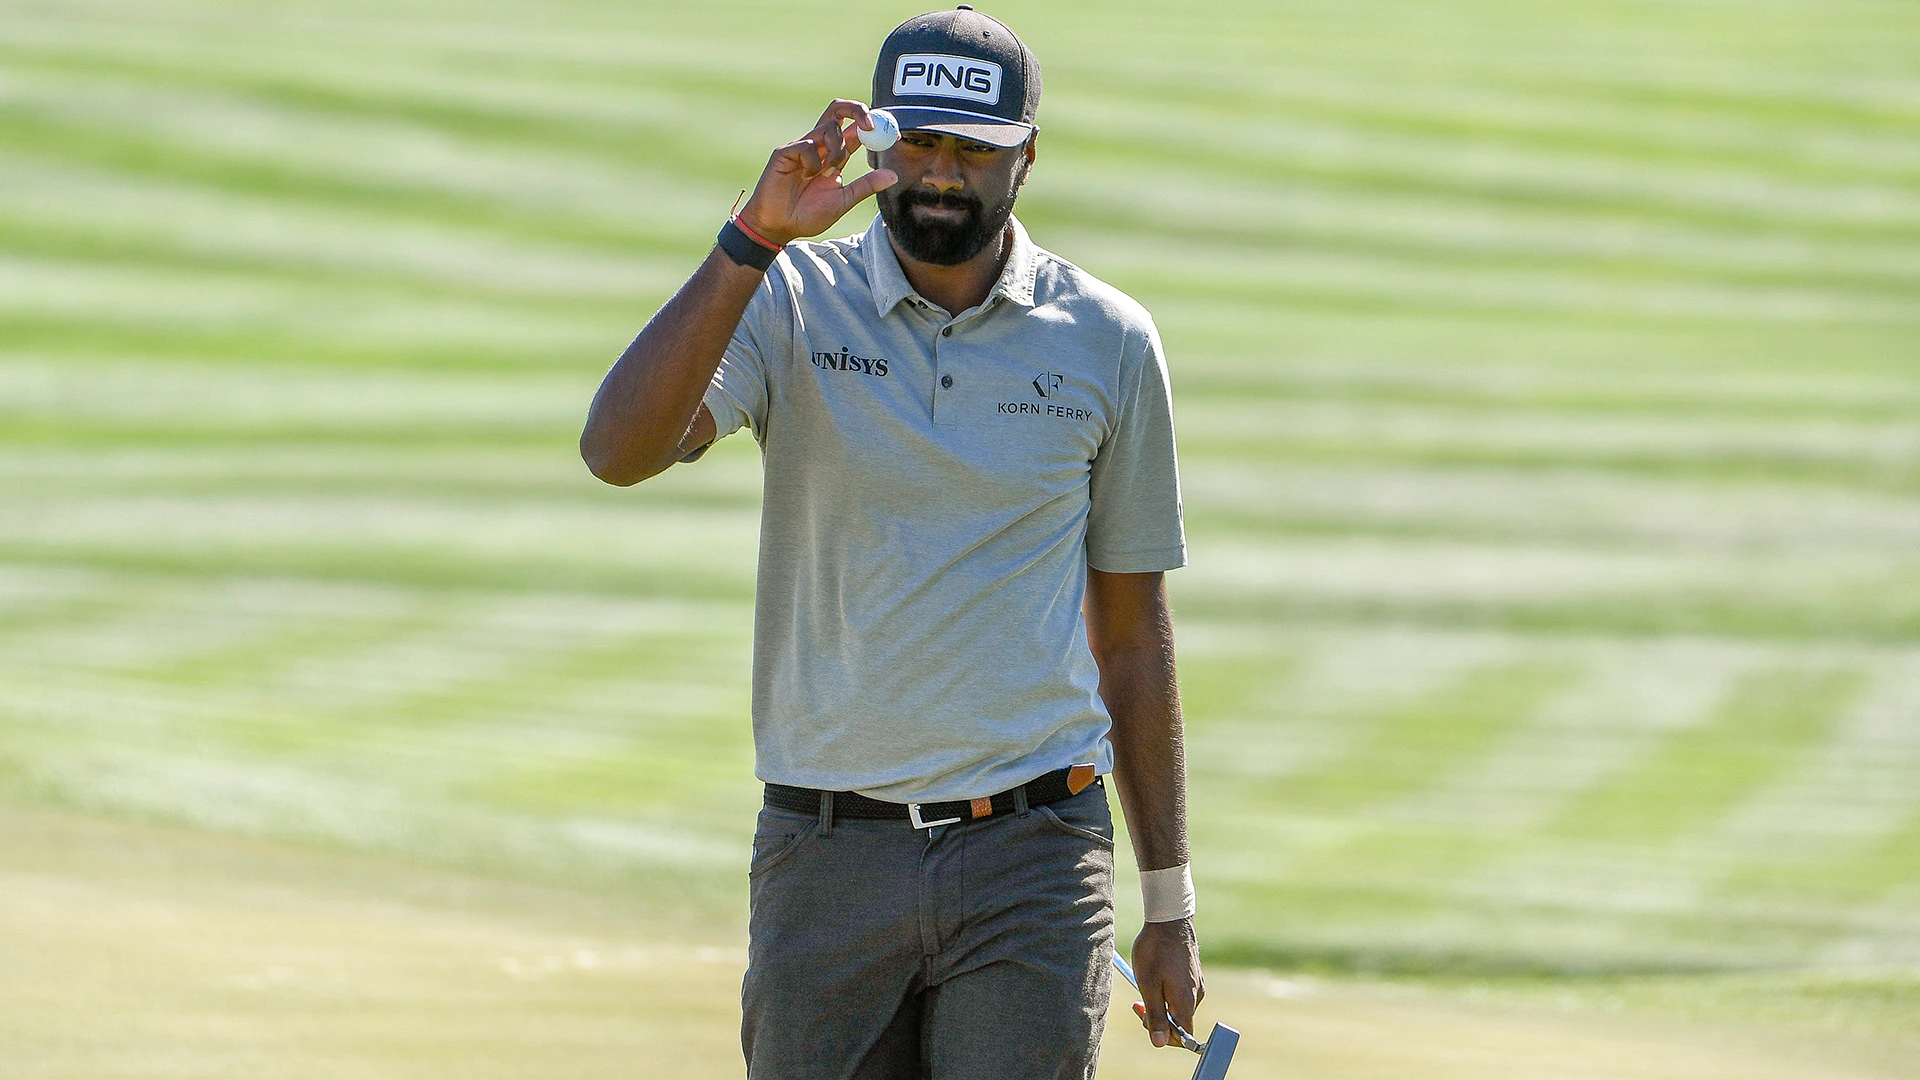 Sahith Theegala feeds off cheers, leads WM Phoenix Open at halfway point 2